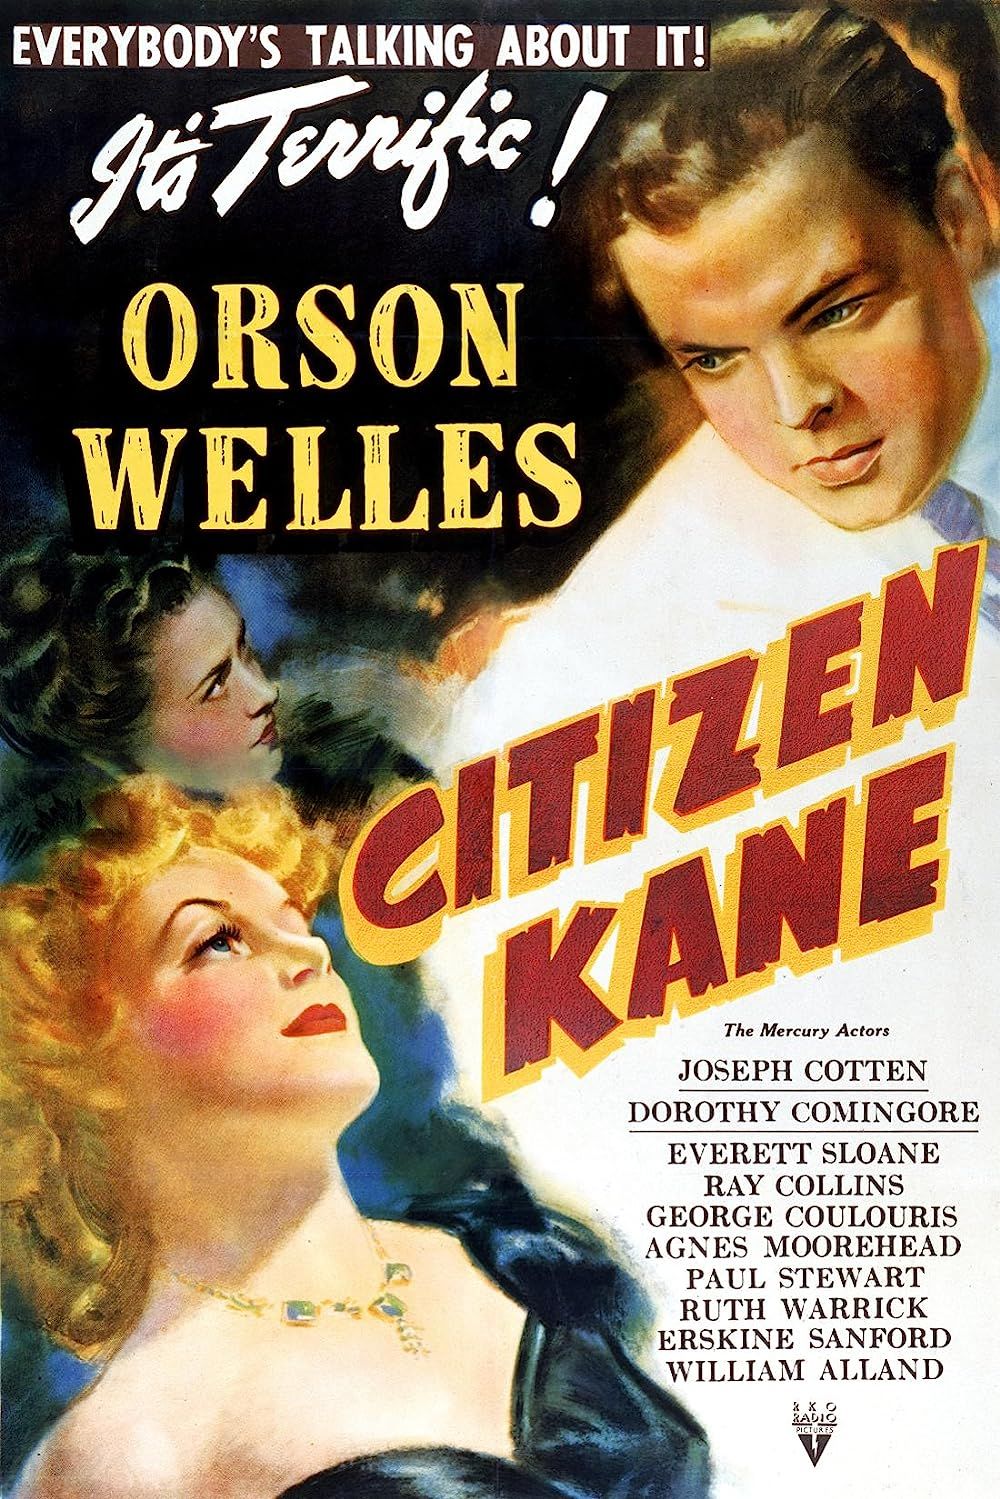 Orson Welles, Dorothy Comingore, and Ruth Warrick in Citizen Kane (1941)